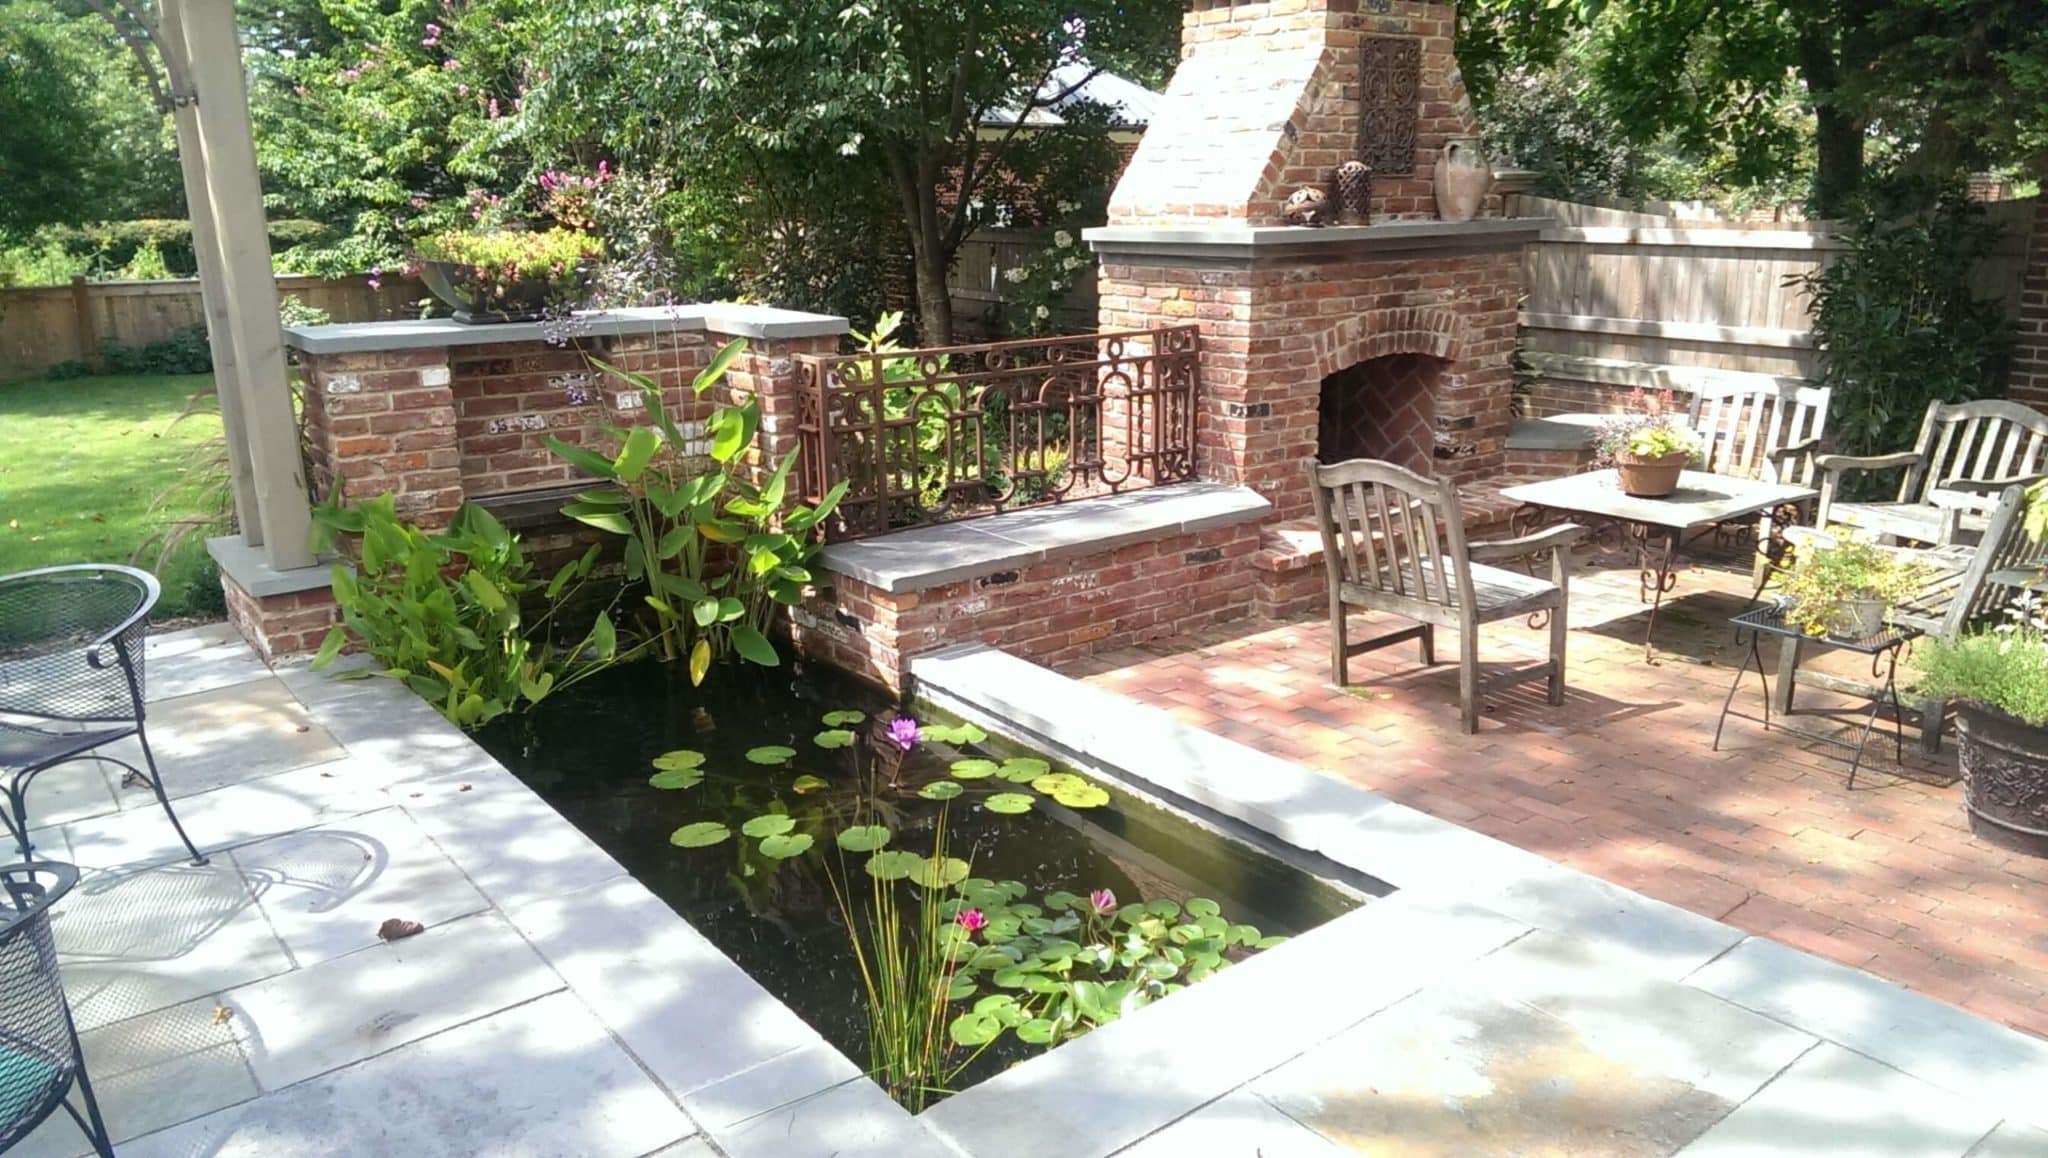 486 Brick and Flagstone Patios with Built-In Fish Pond, Brick Fireplace and Brick Walls with Flagstone Cap